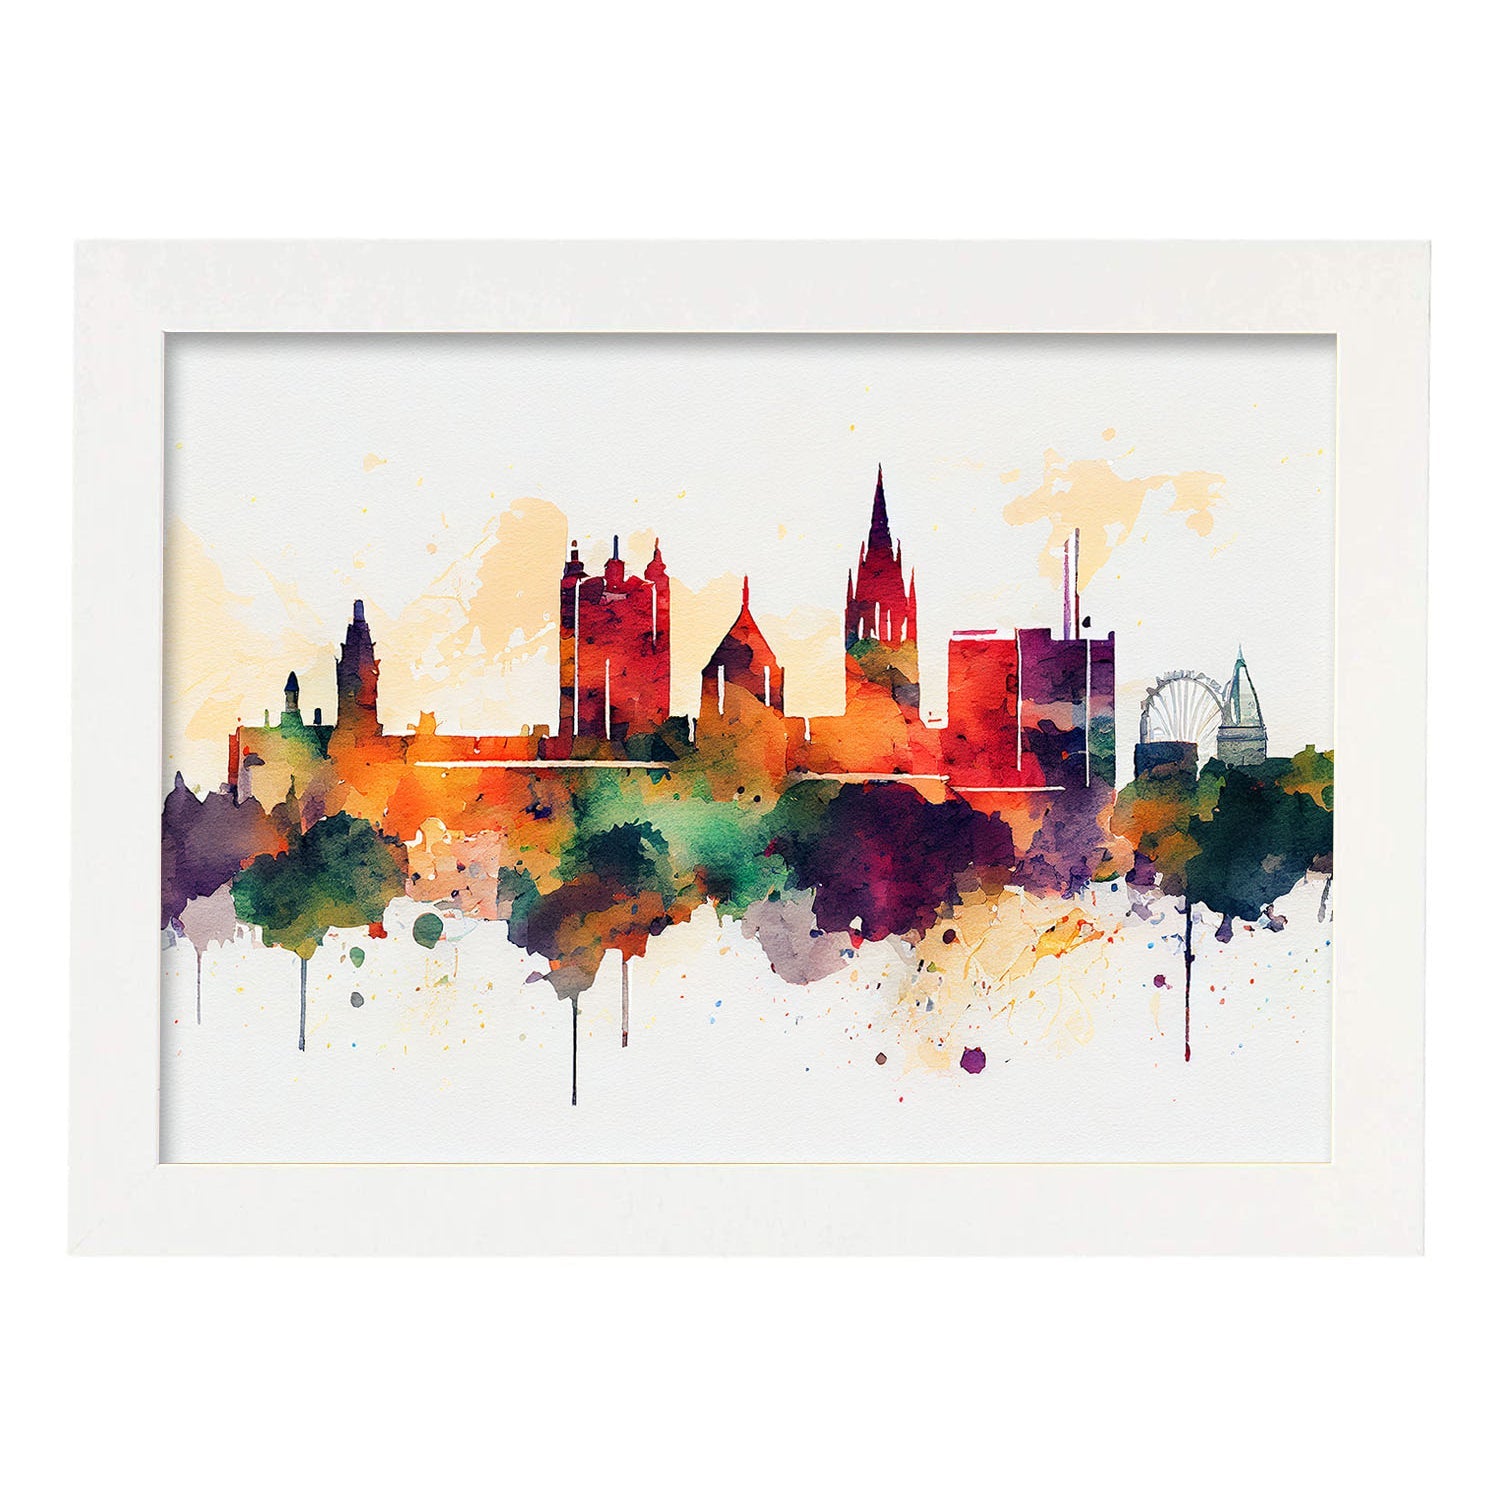 Nacnic watercolor of a skyline of the city of Cardiff. Aesthetic Wall Art Prints for Bedroom or Living Room Design.-Artwork-Nacnic-A4-Marco Blanco-Nacnic Estudio SL